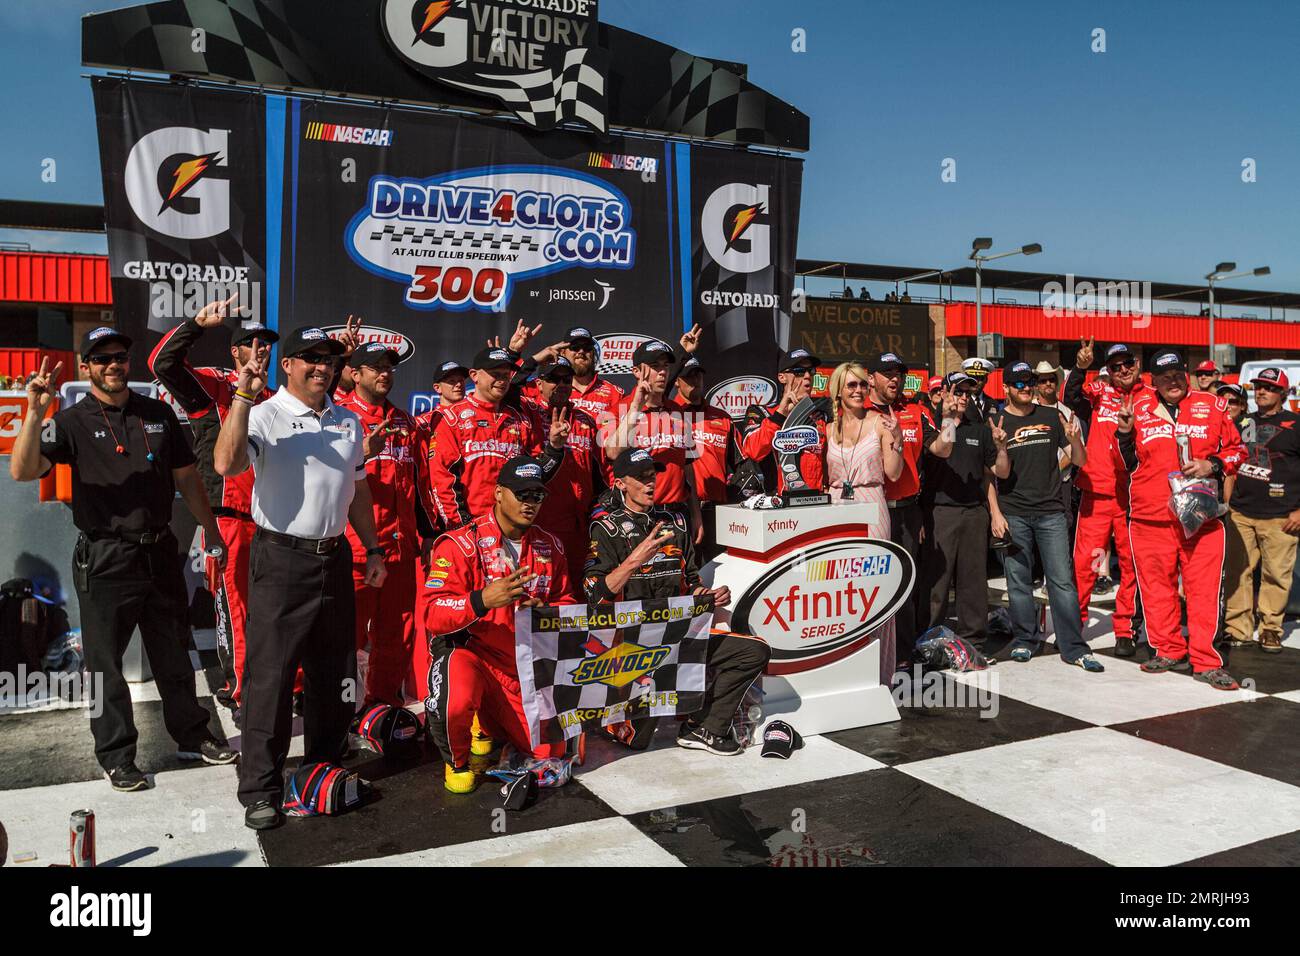 NASCAR Driver Kevin Harvick pulled away from Brendan Gaughan and held on to win the Xfinity Series Drive4Clots.com 300 at Auto Club Speedway on Saturday. It's his 46th career Xfinity Series win but first at the track for the California native. Harvick also now has 12 top-five finishes in 19 races at Fontana. Los Angeles, CA. March 21, 2015. Stock Photo